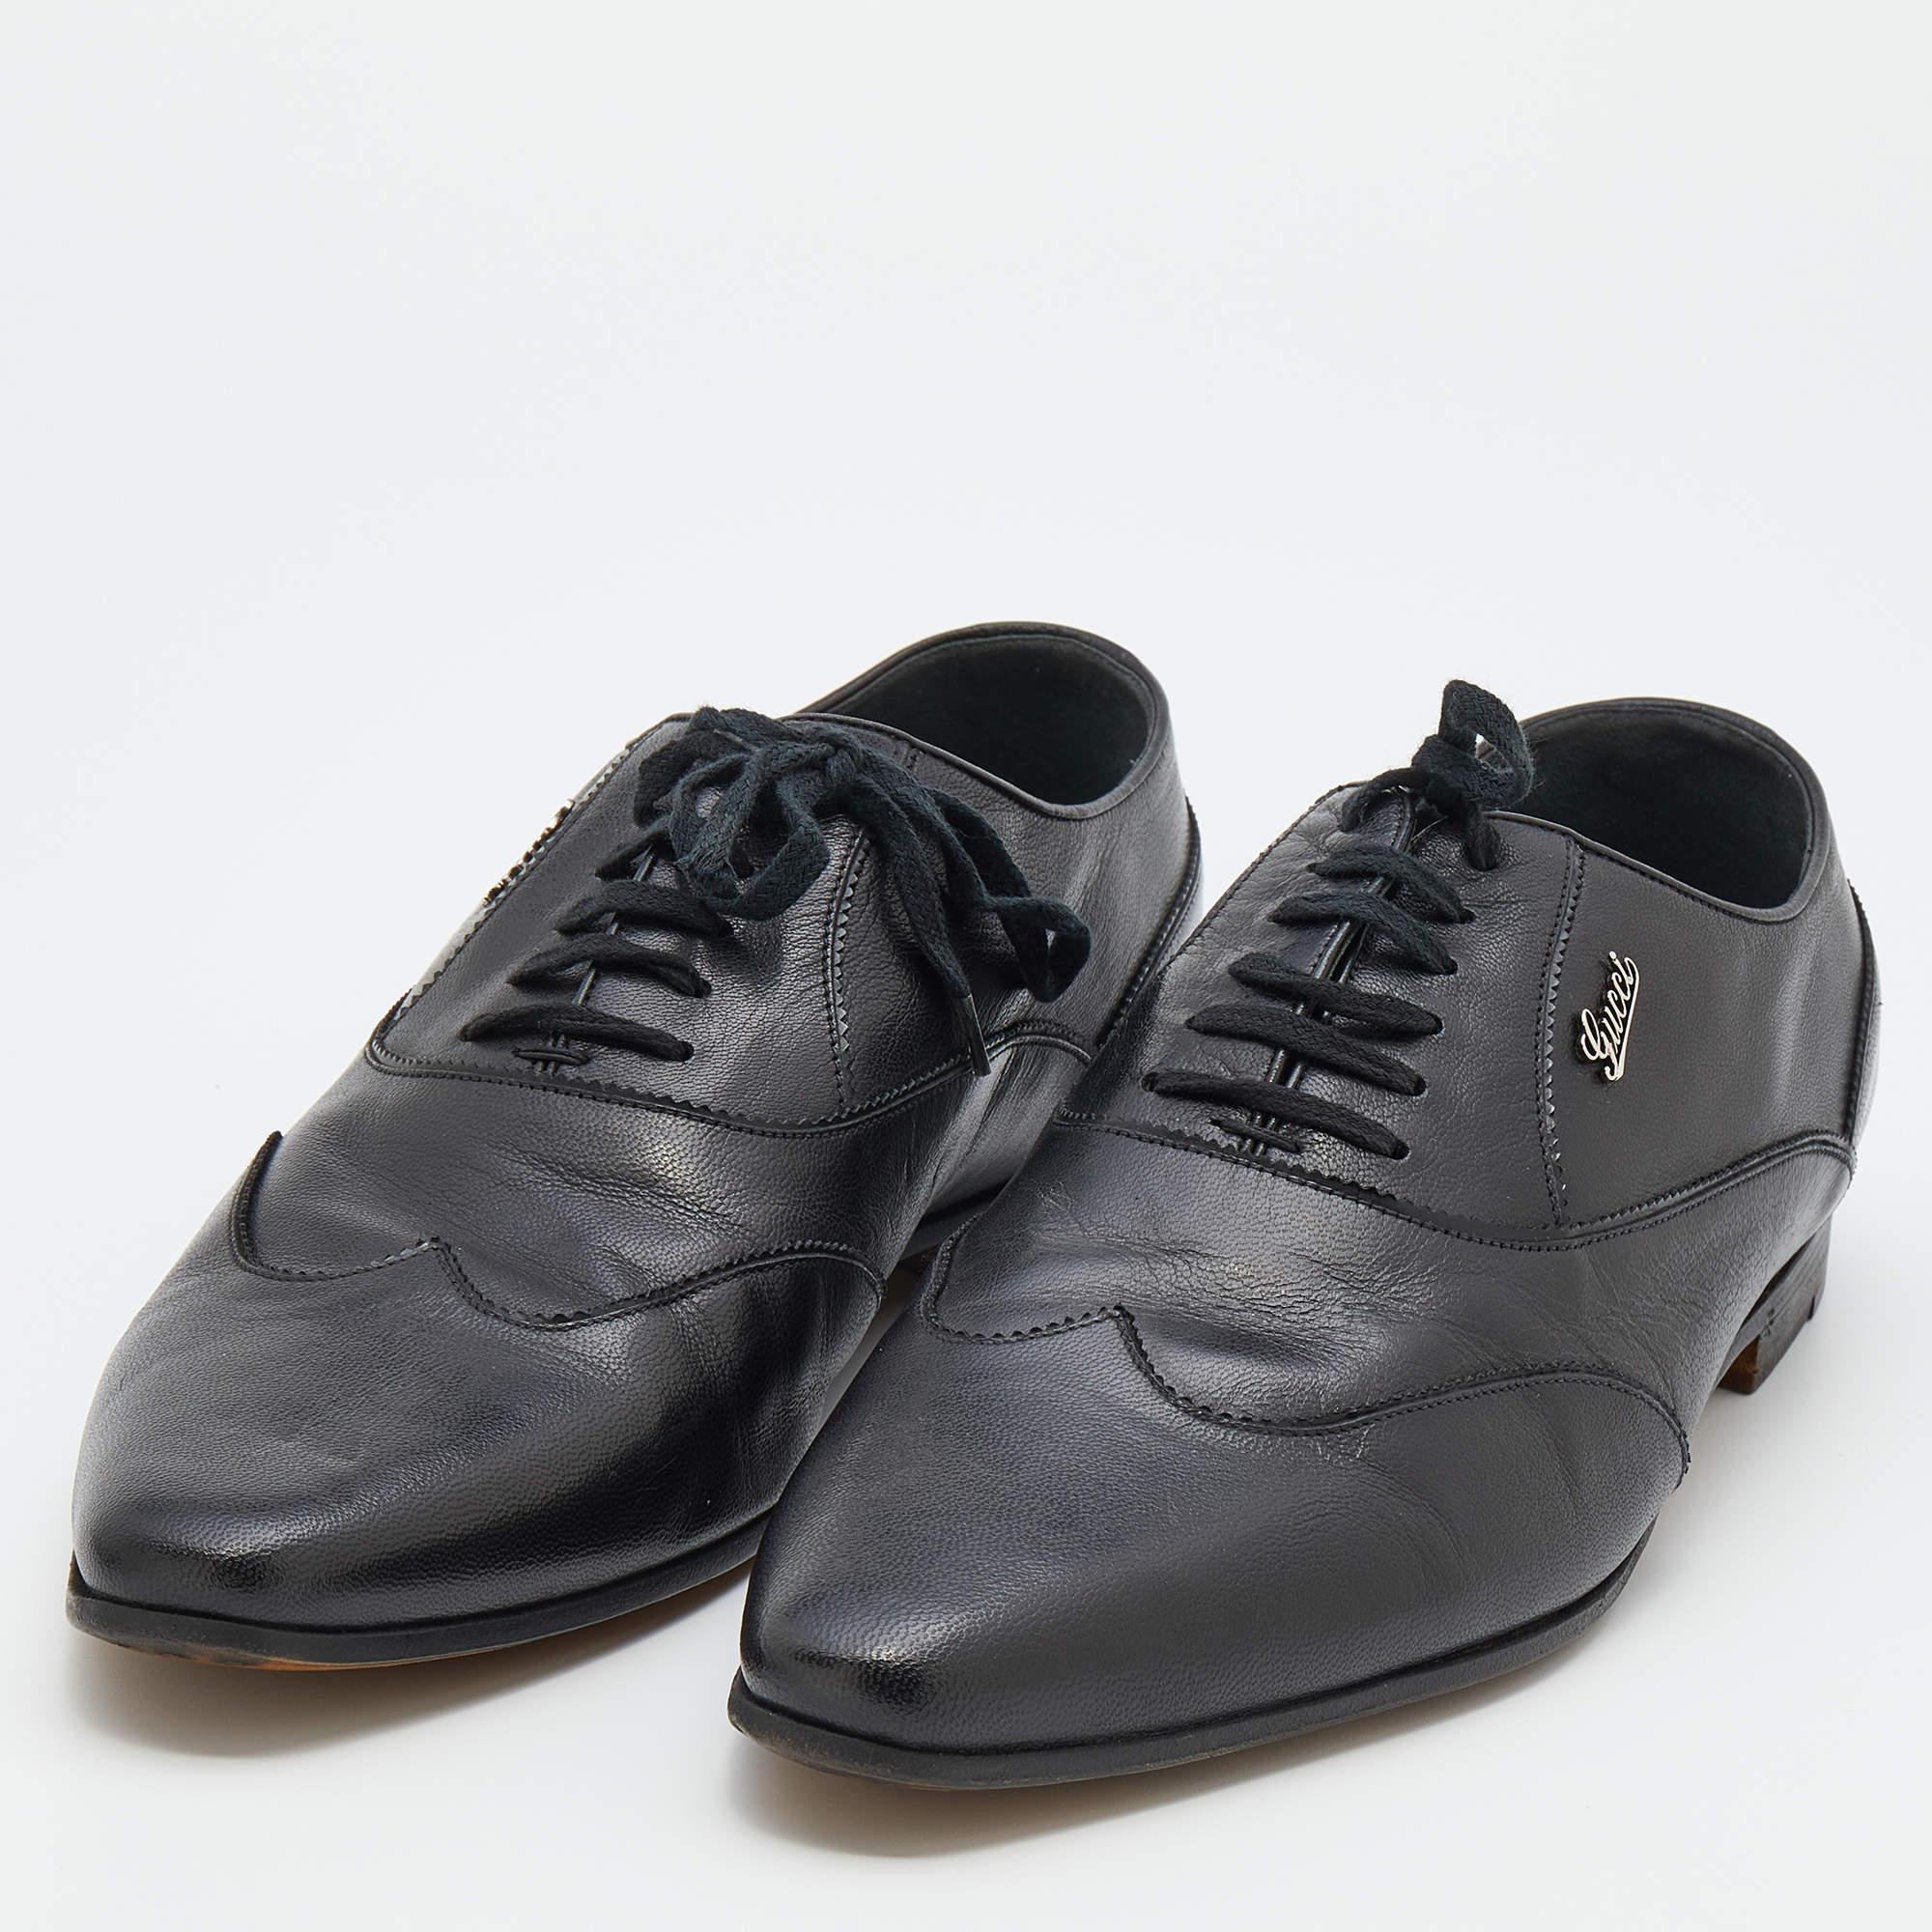 Gucci Black Leather Wingtip Lace Up Oxfords Size 43 2